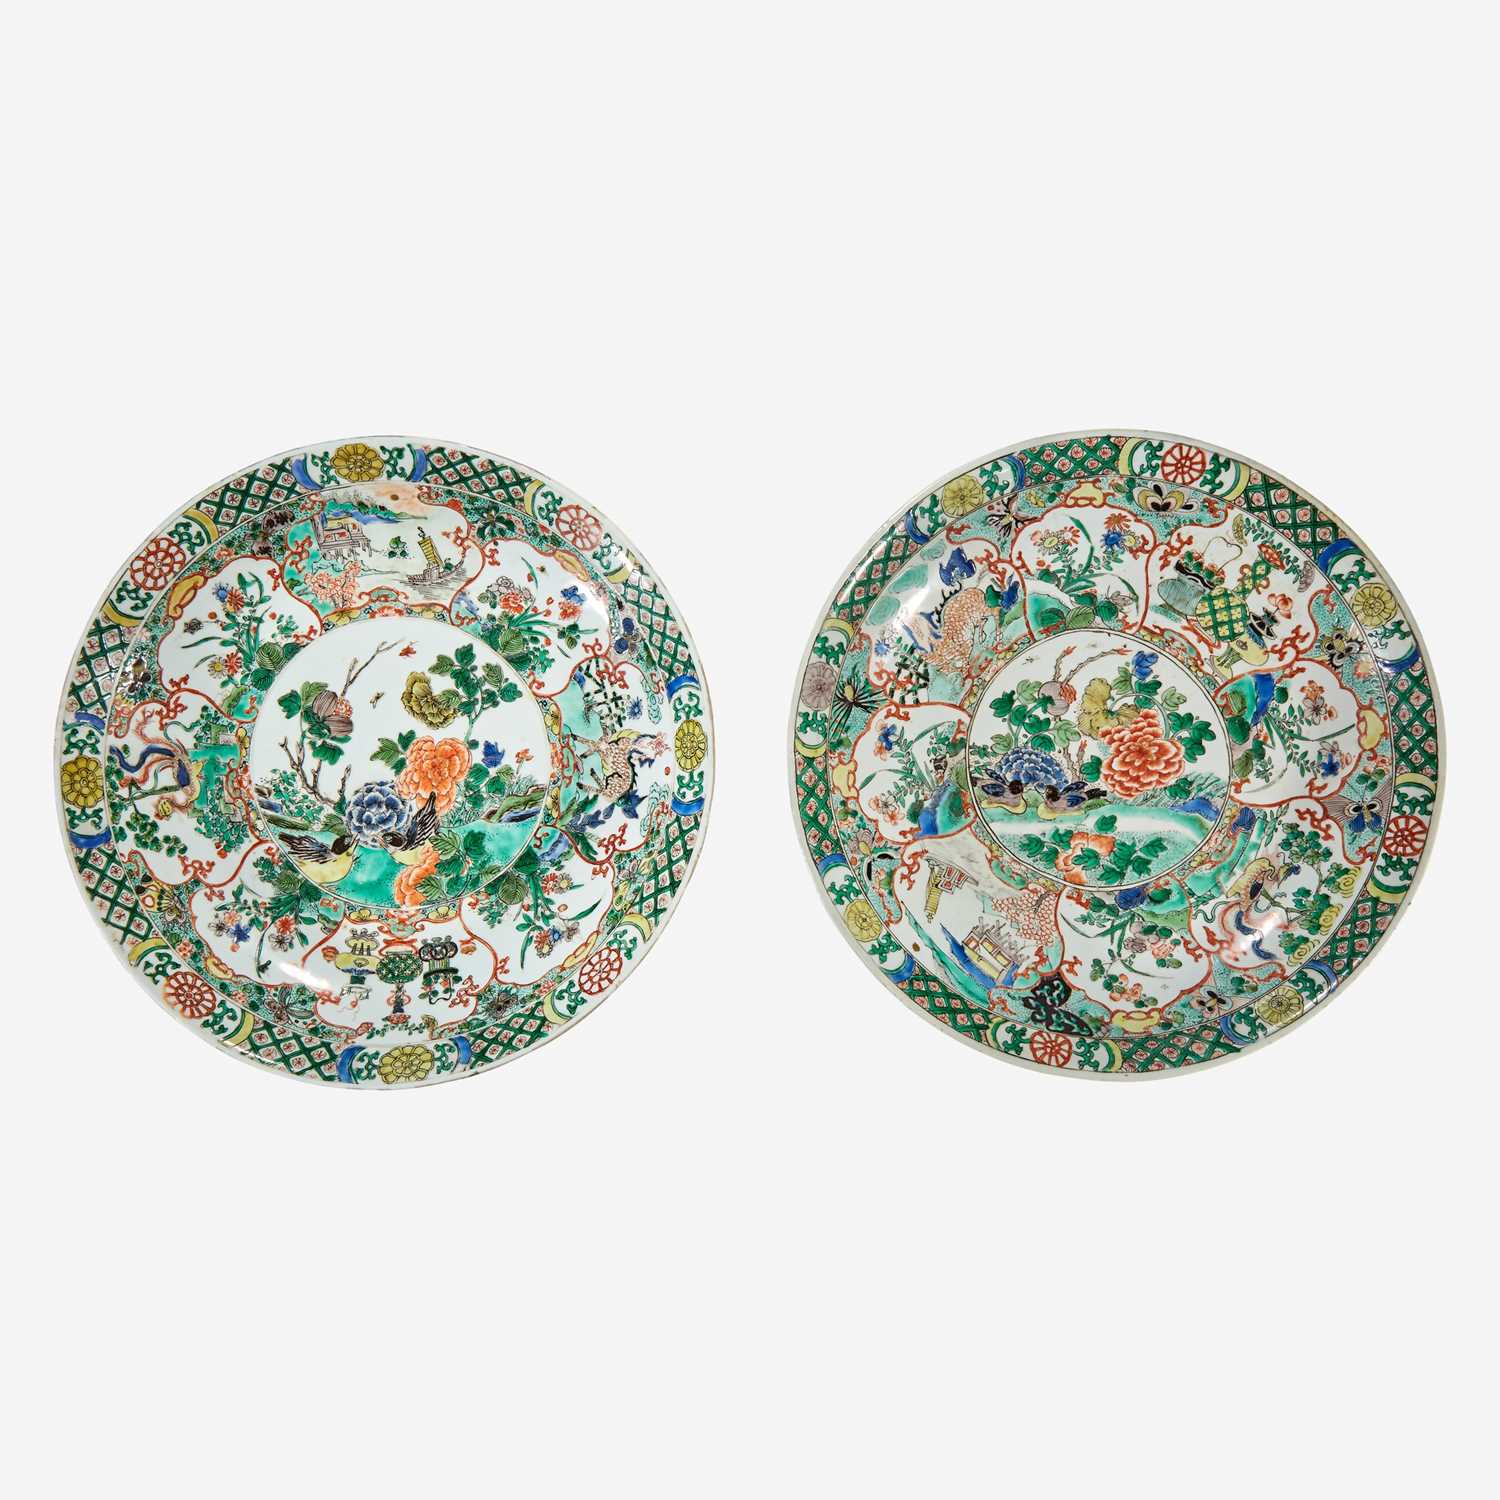 Lot 50 - Two similar Chinese famille verte-decorated porcelain circular dishes